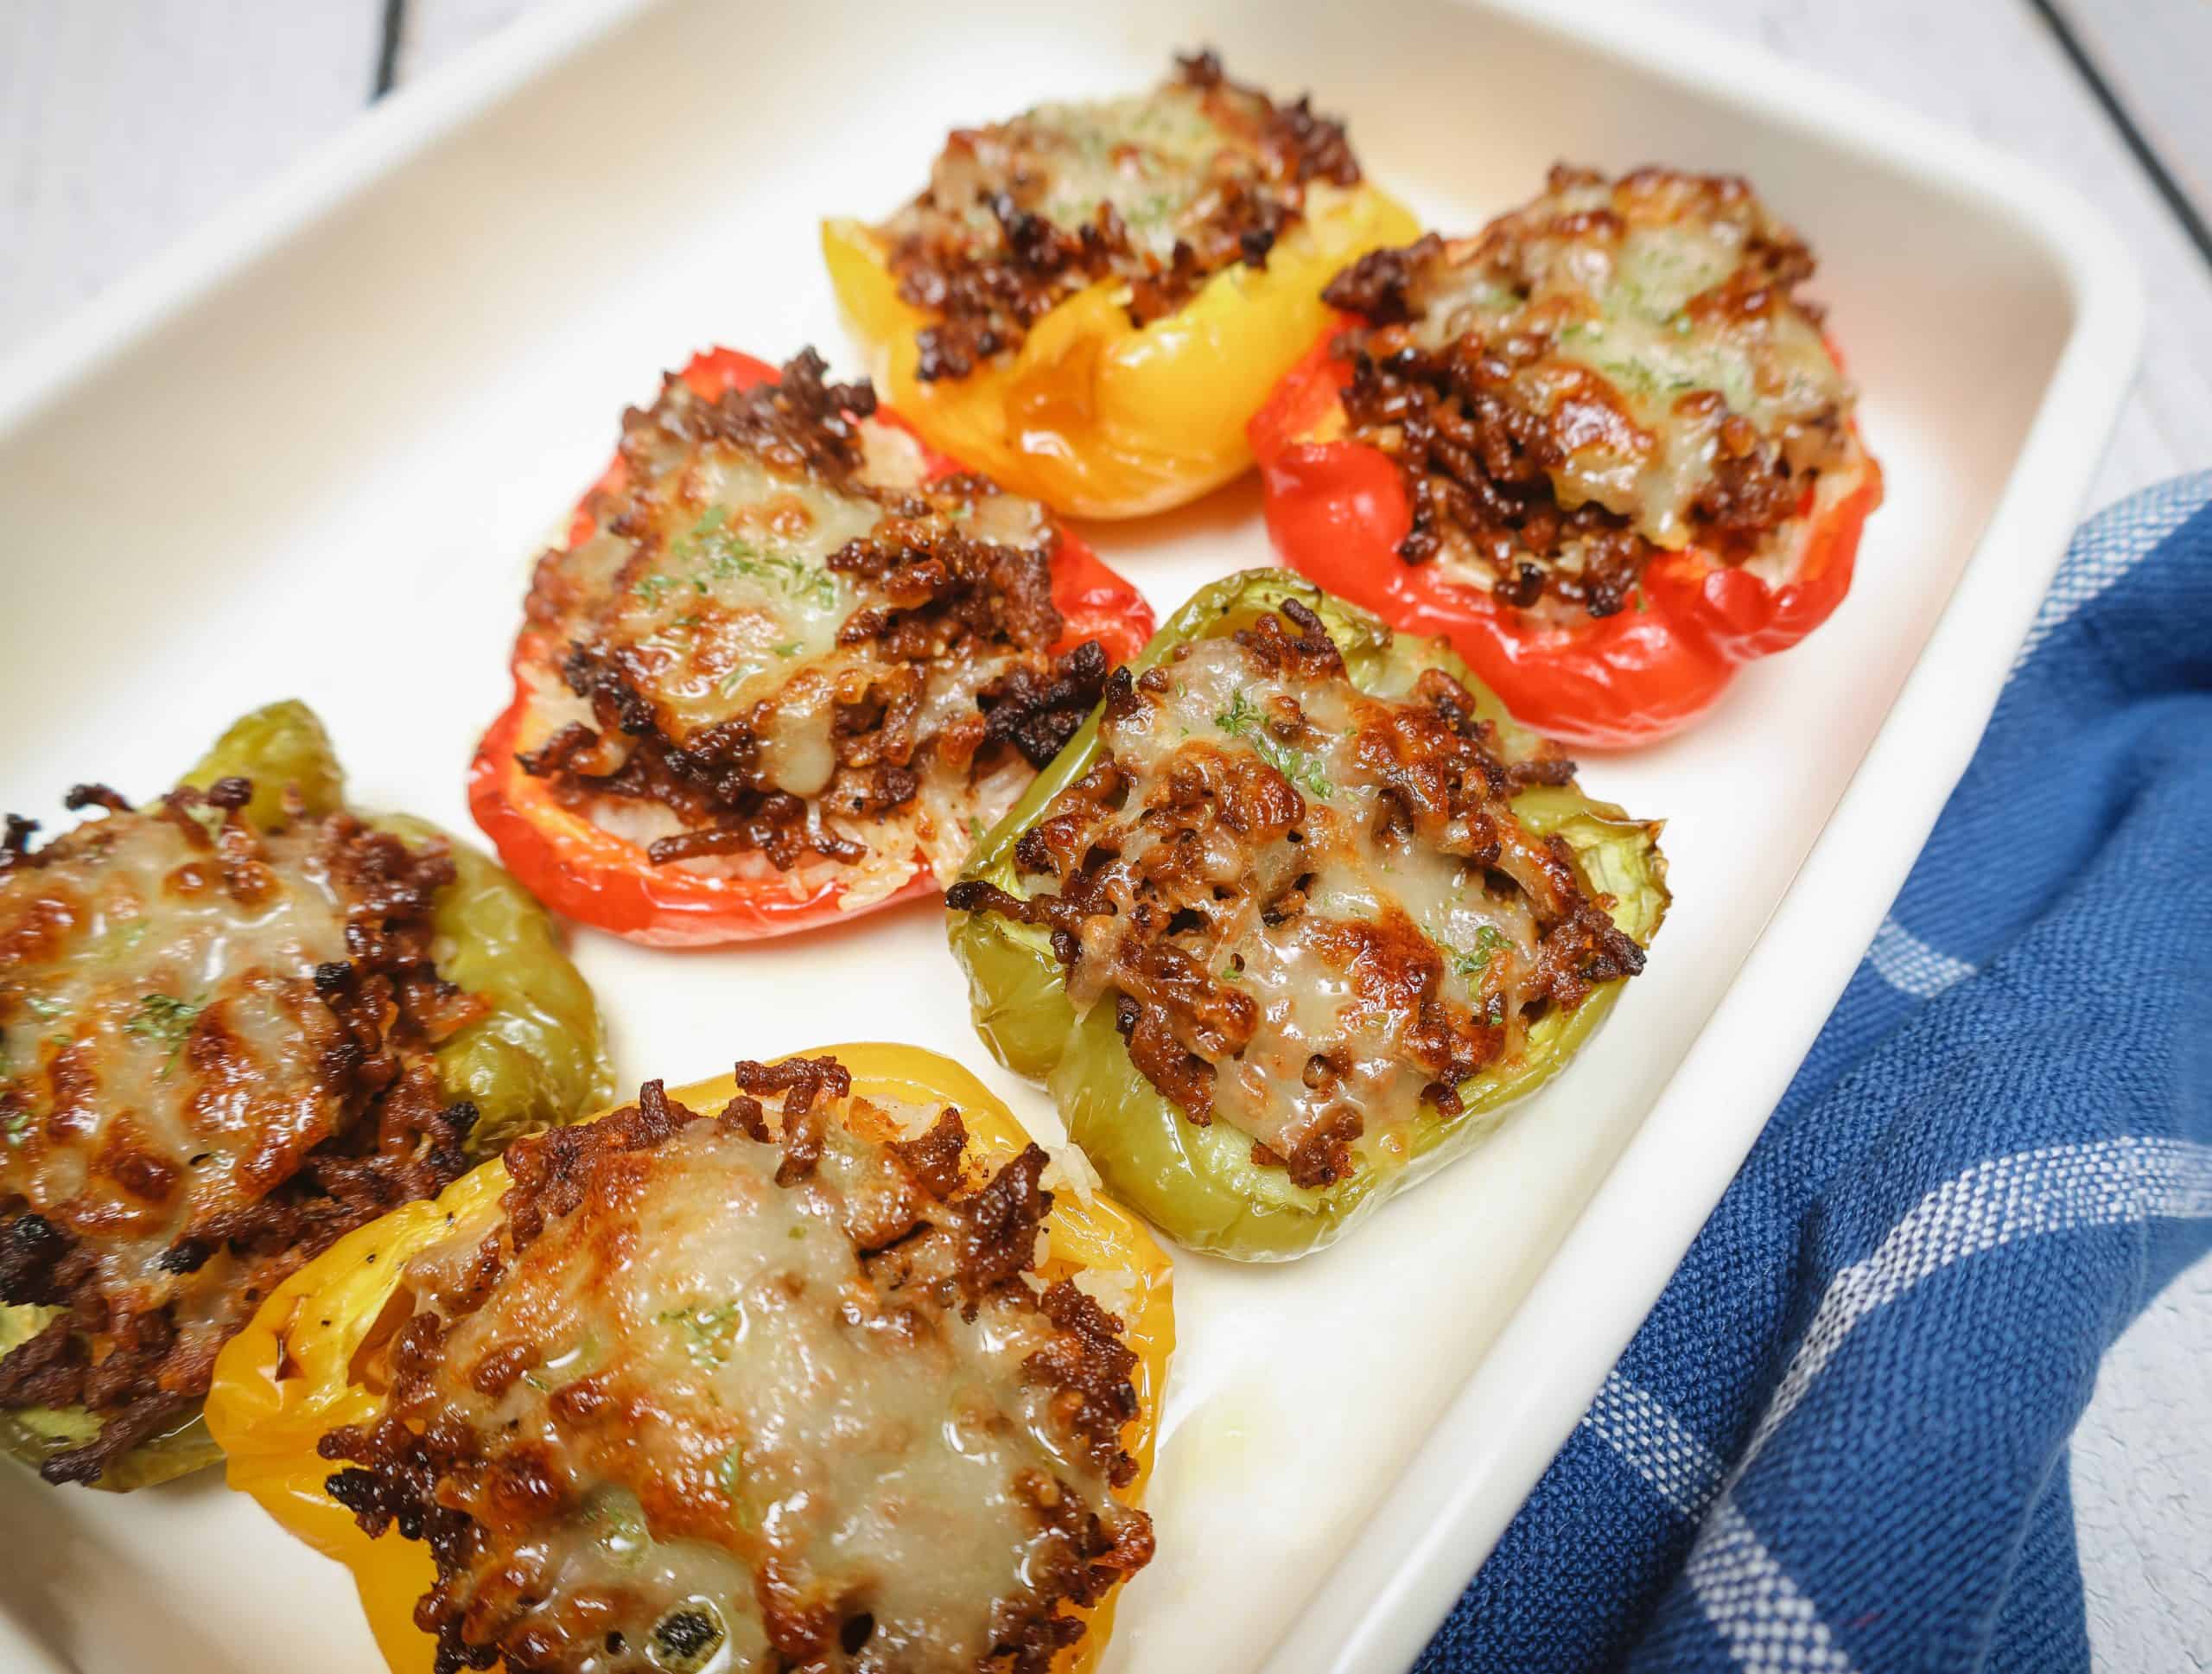 Stuffed Peppers Recipe: A Colorful and Flavorful Dish